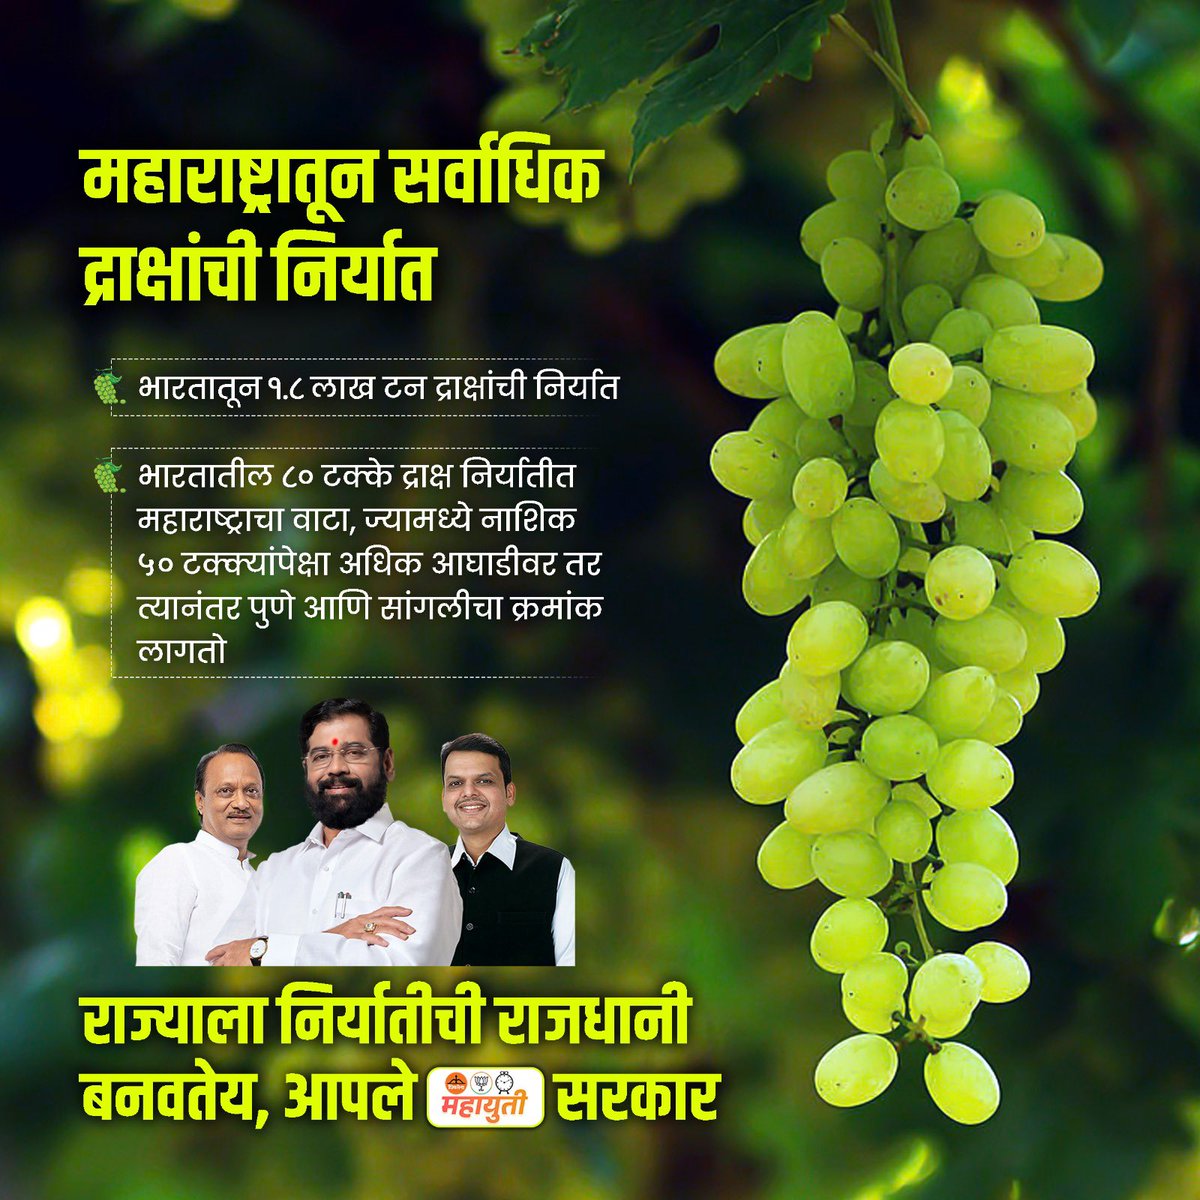 With 80% of India's grape exports coming from Maharashtra, it's clear that the state's agricultural sector is thriving. Kudos to CM Eknath Shinde and his government for creating an environment conducive to agricultural growth and prosperity.